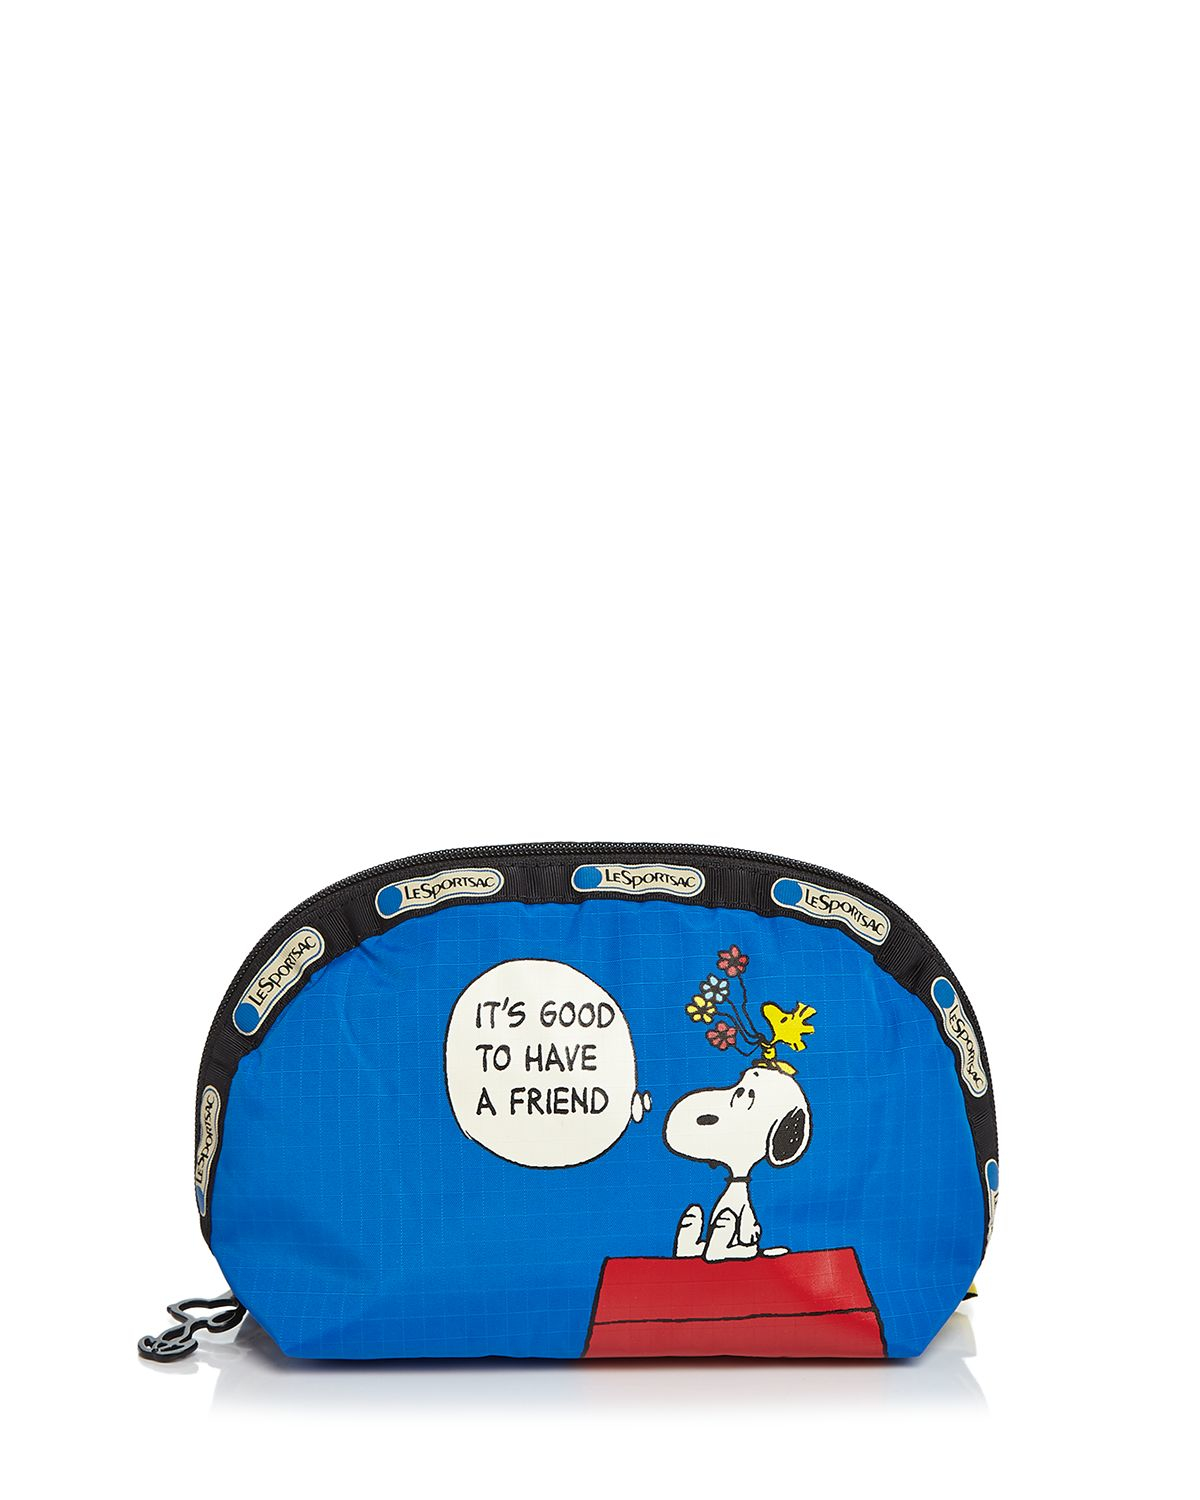 Lyst - Lesportsac Peanuts Snoopy Medium Dome Cosmetic Case in Blue